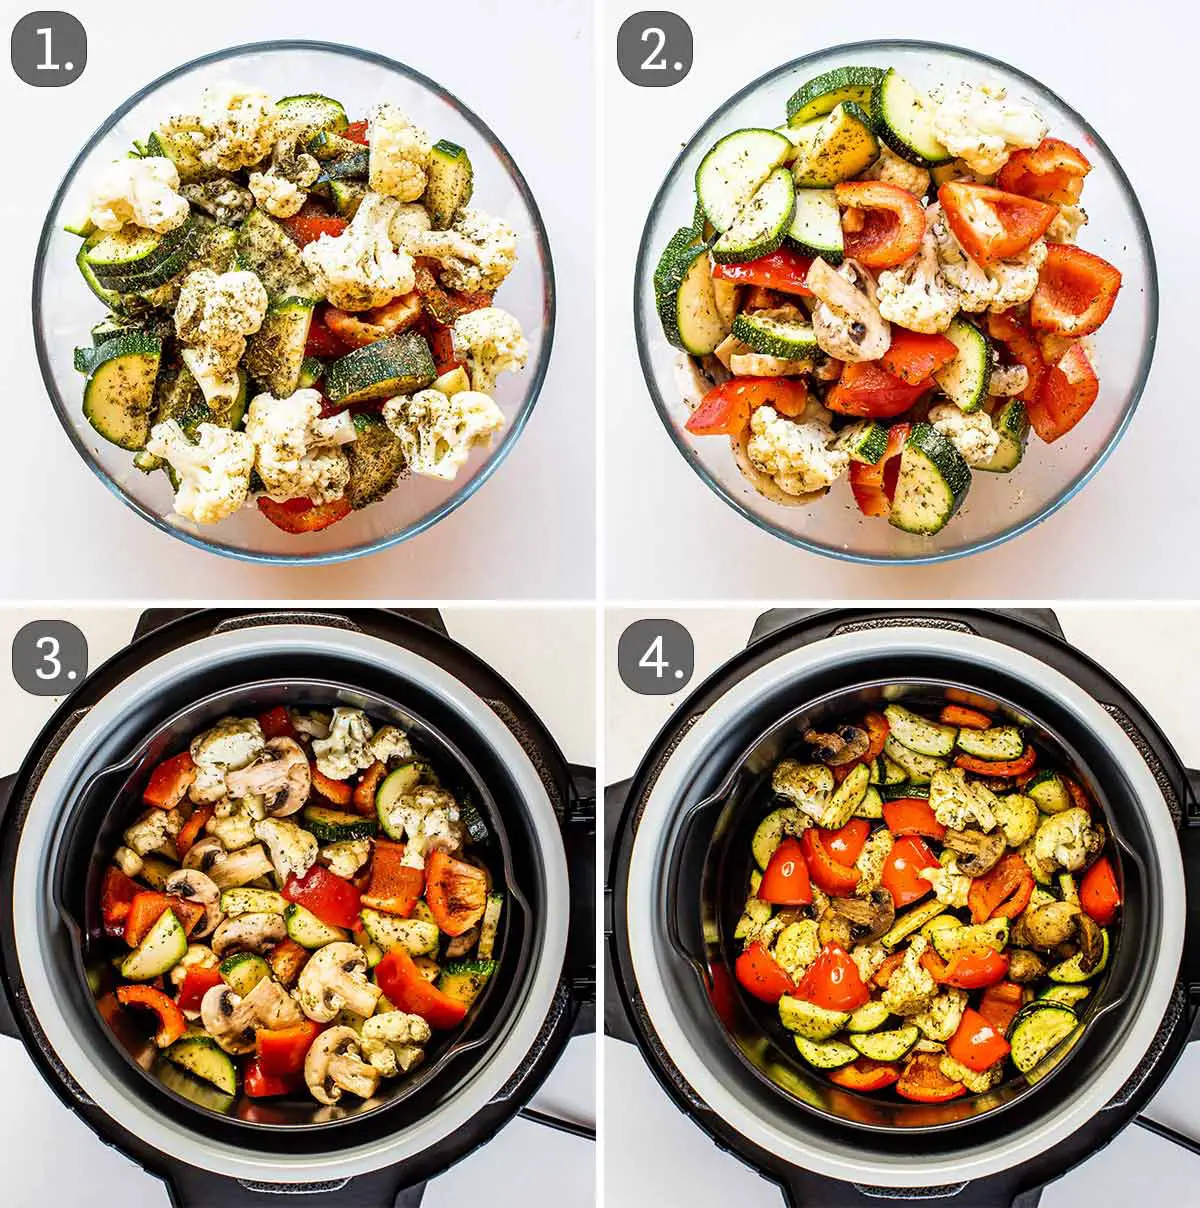 process shots showing how to make air fryer vegetables.